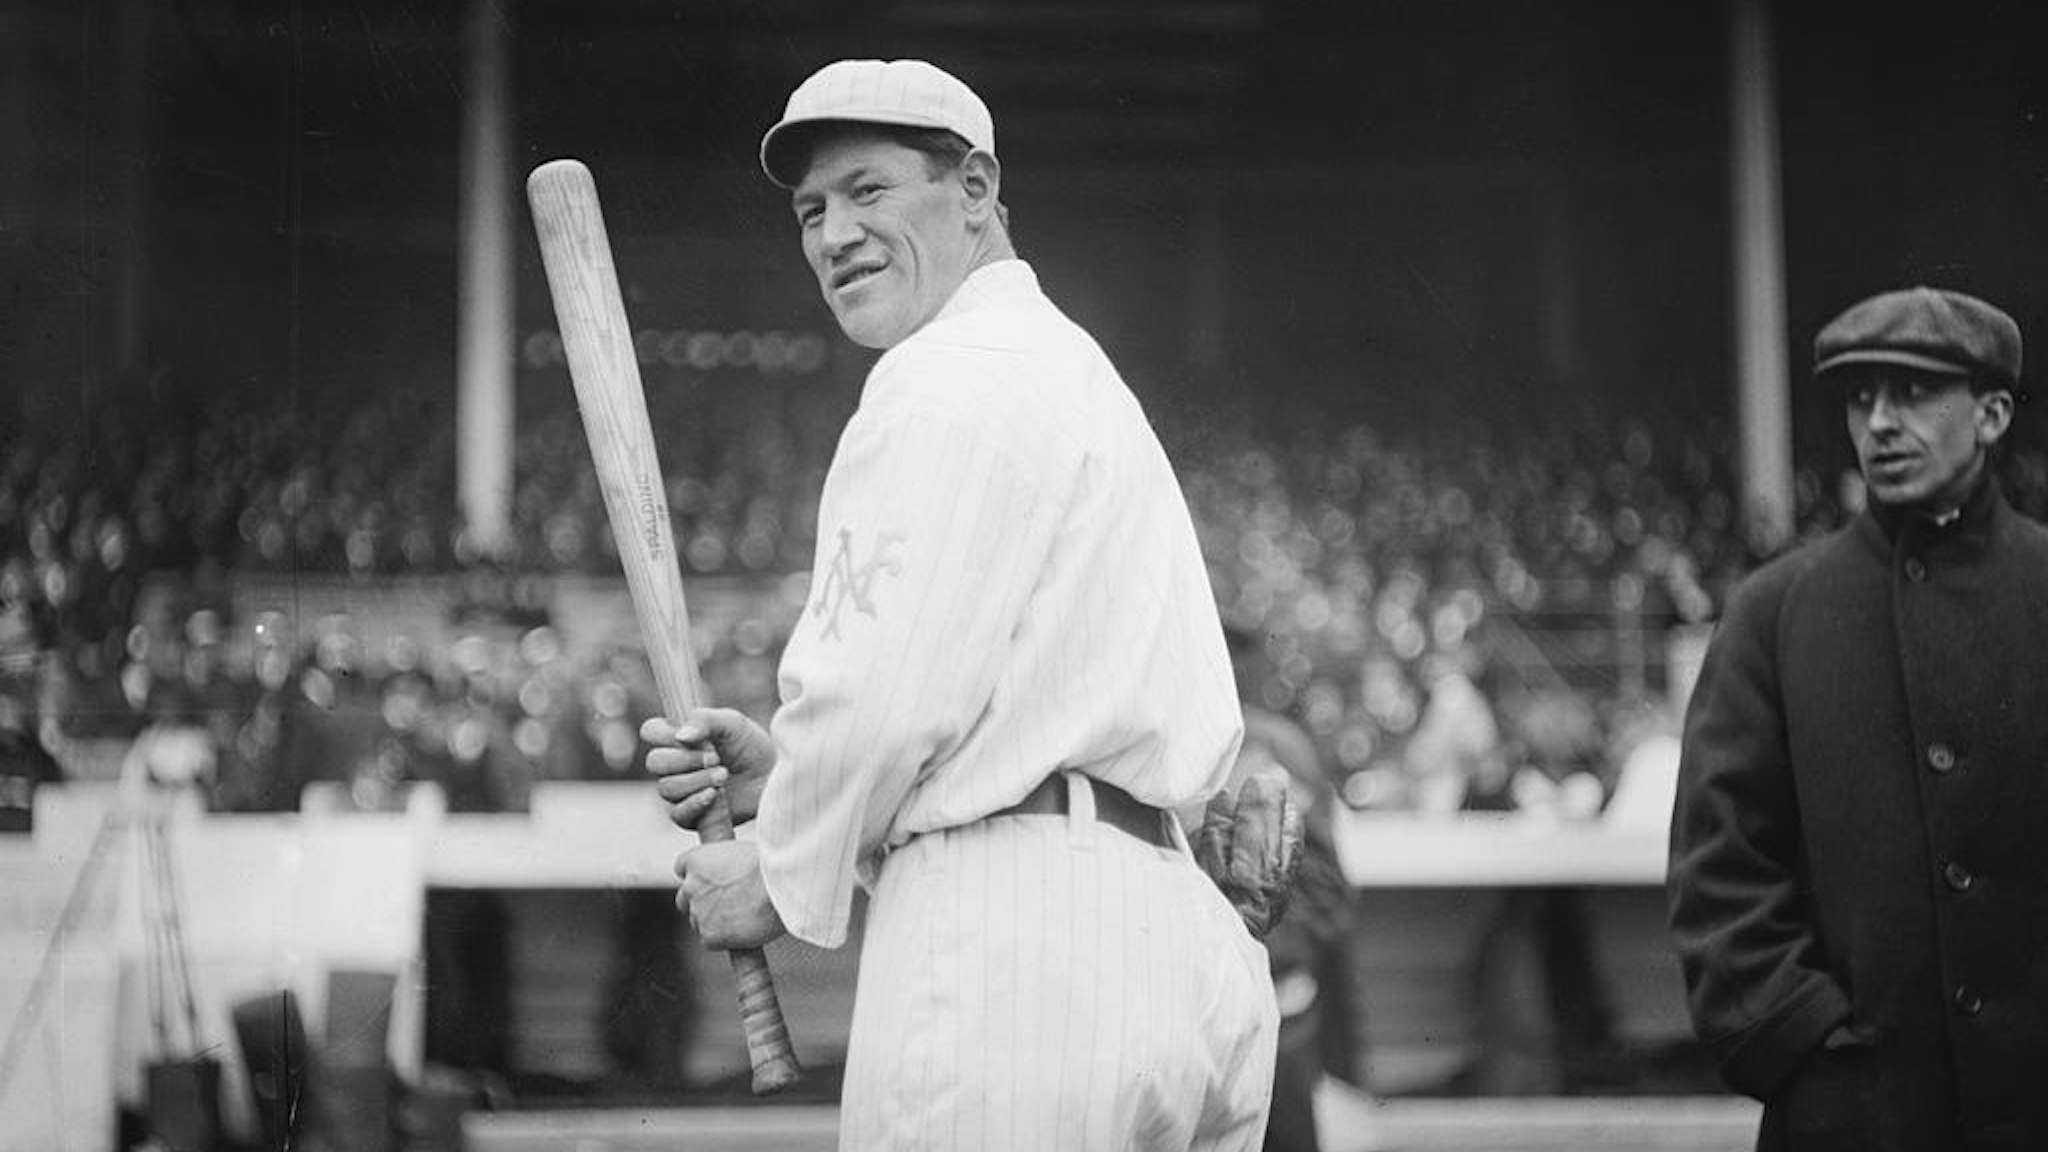 American multi-sport athlete and Olympic gold medalist Jim Thorpe (1888 - 1953), here of the New York Giants baseball team, waits for a pitch during a game at the Polo Grounds, New York, New York, 1913. (Photo by Bain News Service/Interim Archives/Getty Images)